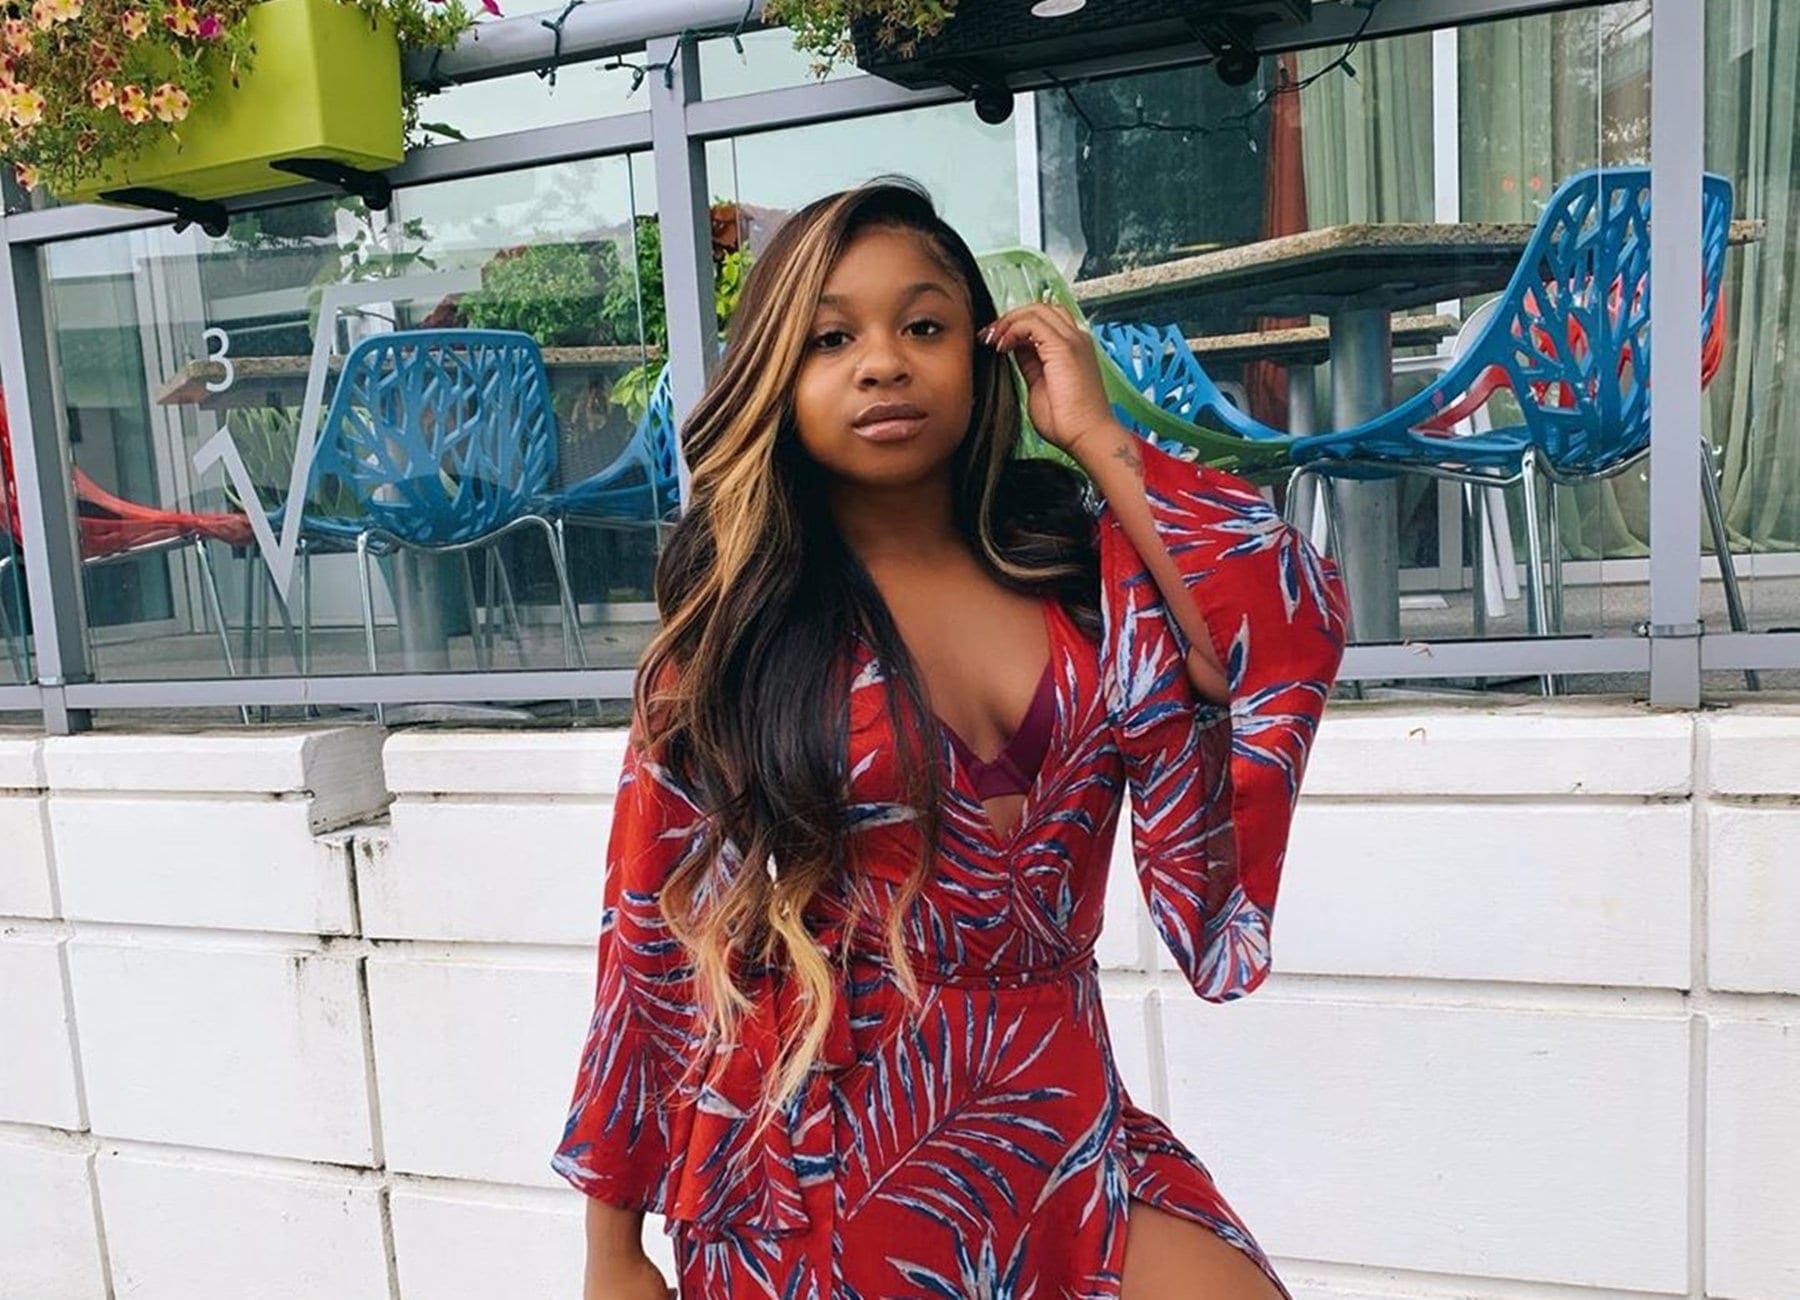 Toya Johnson's Daughter, Reginae Carter Is Working Out At Home To Keep Her Body Snatched - See The Clips